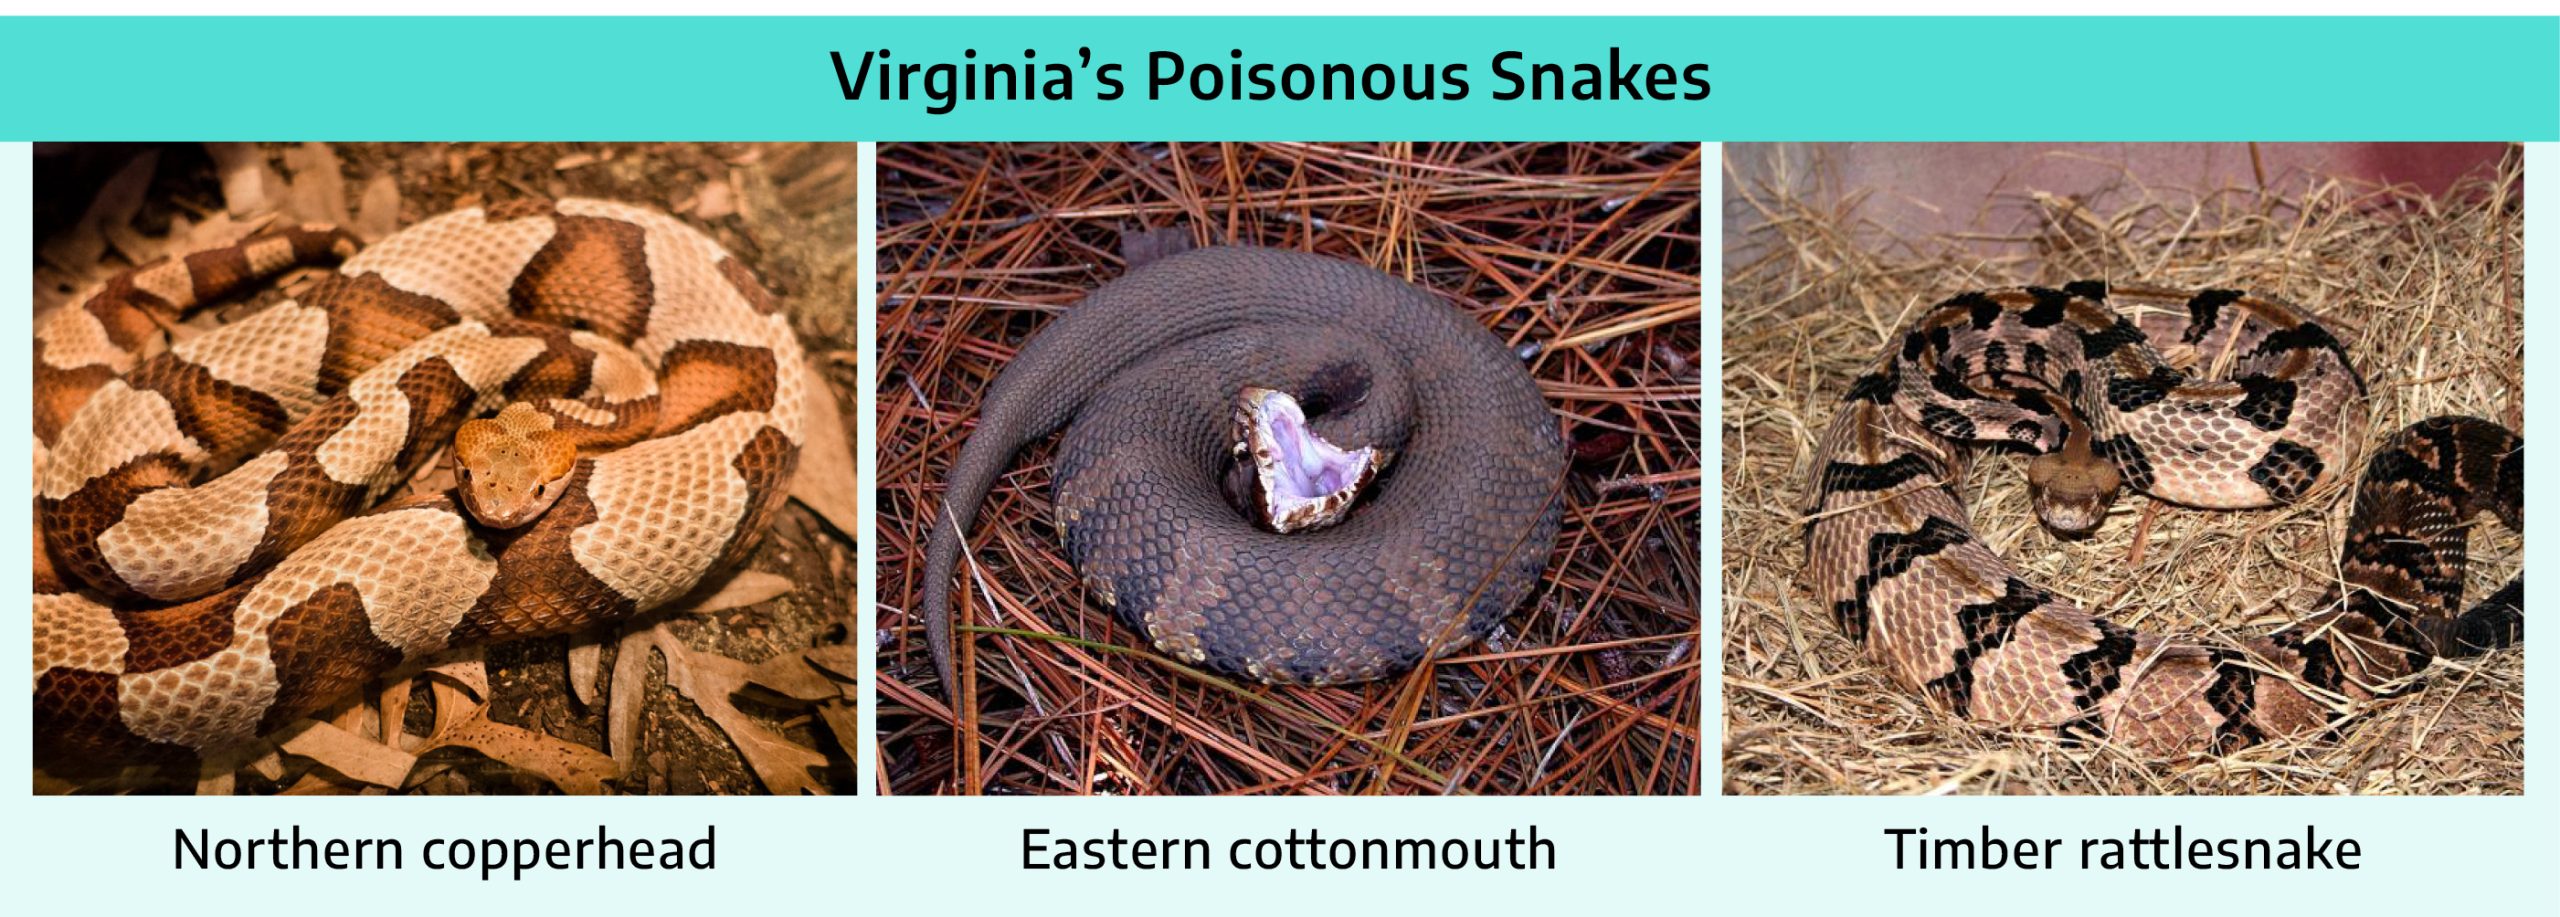 Three photographs. The first is of a northern copperhead; a tan colored snake with light and darker brown marks along the body. The second is eastern cottonmouth; a darker colored snake with light brown and darker brown markings. The third is a timber rattlesnake; a light brown with narrow dark brown and black markings.